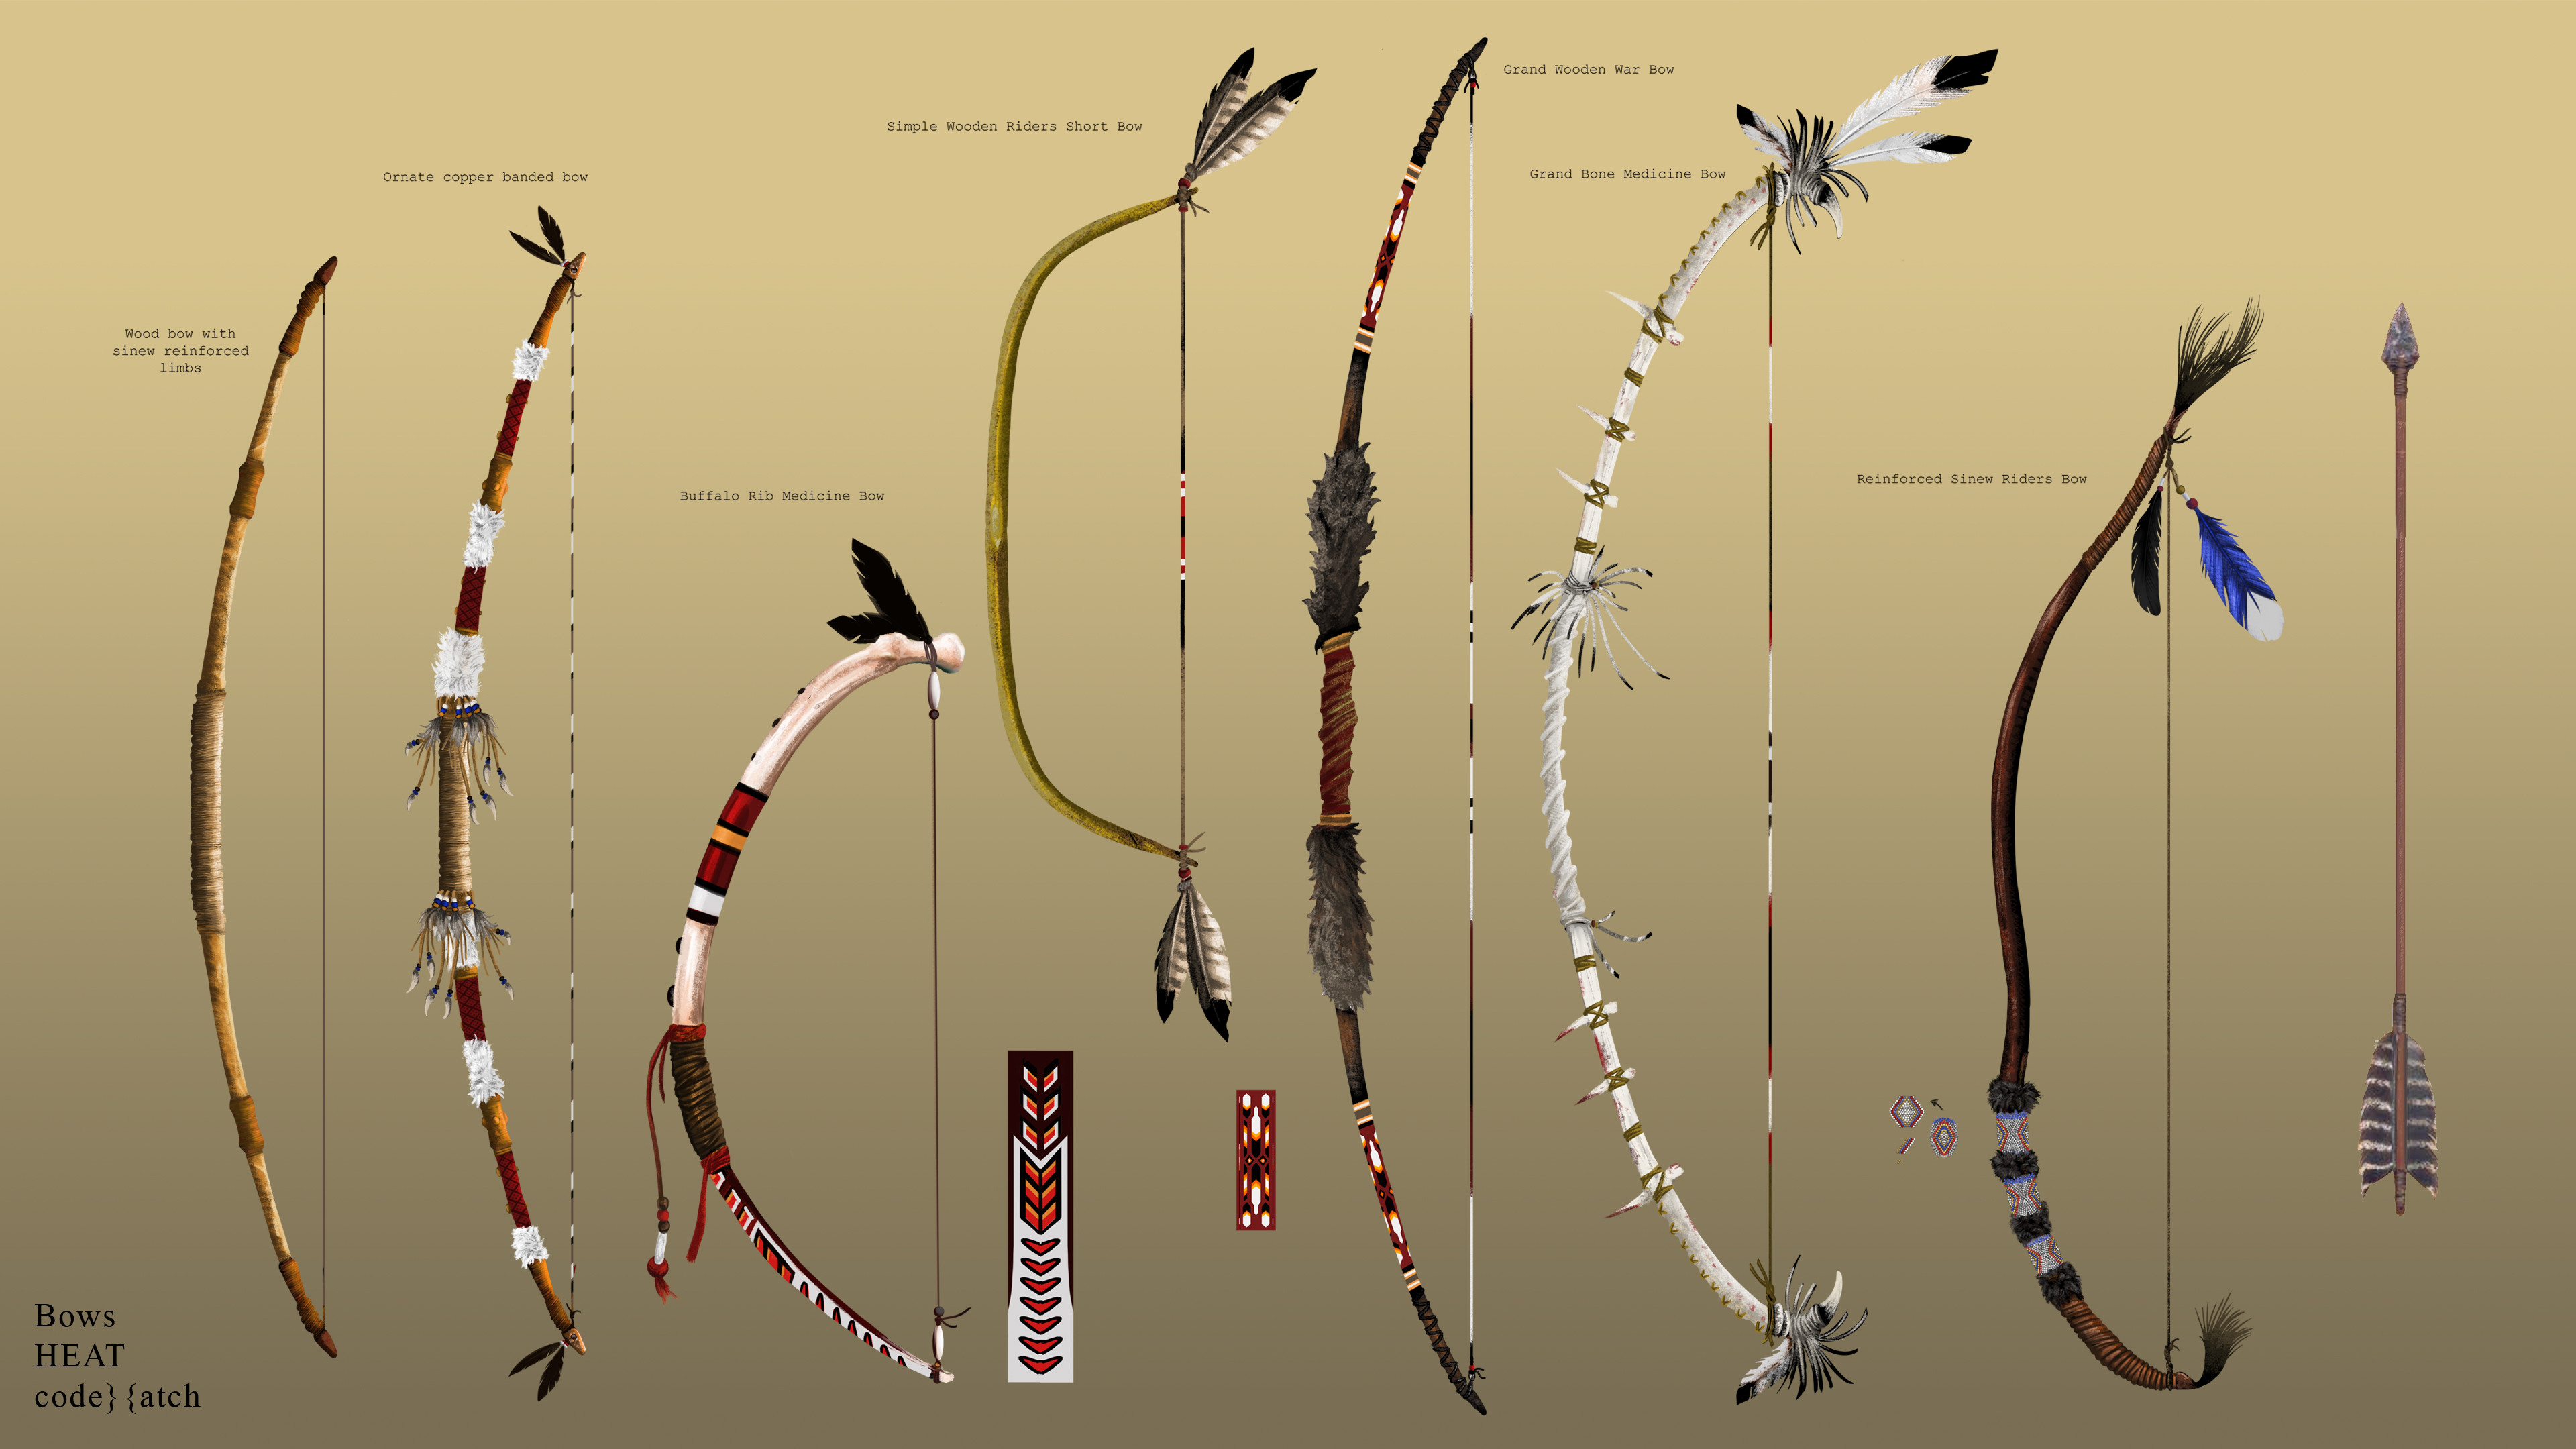 Early native American bow designs for wood, bone, and composite materials.